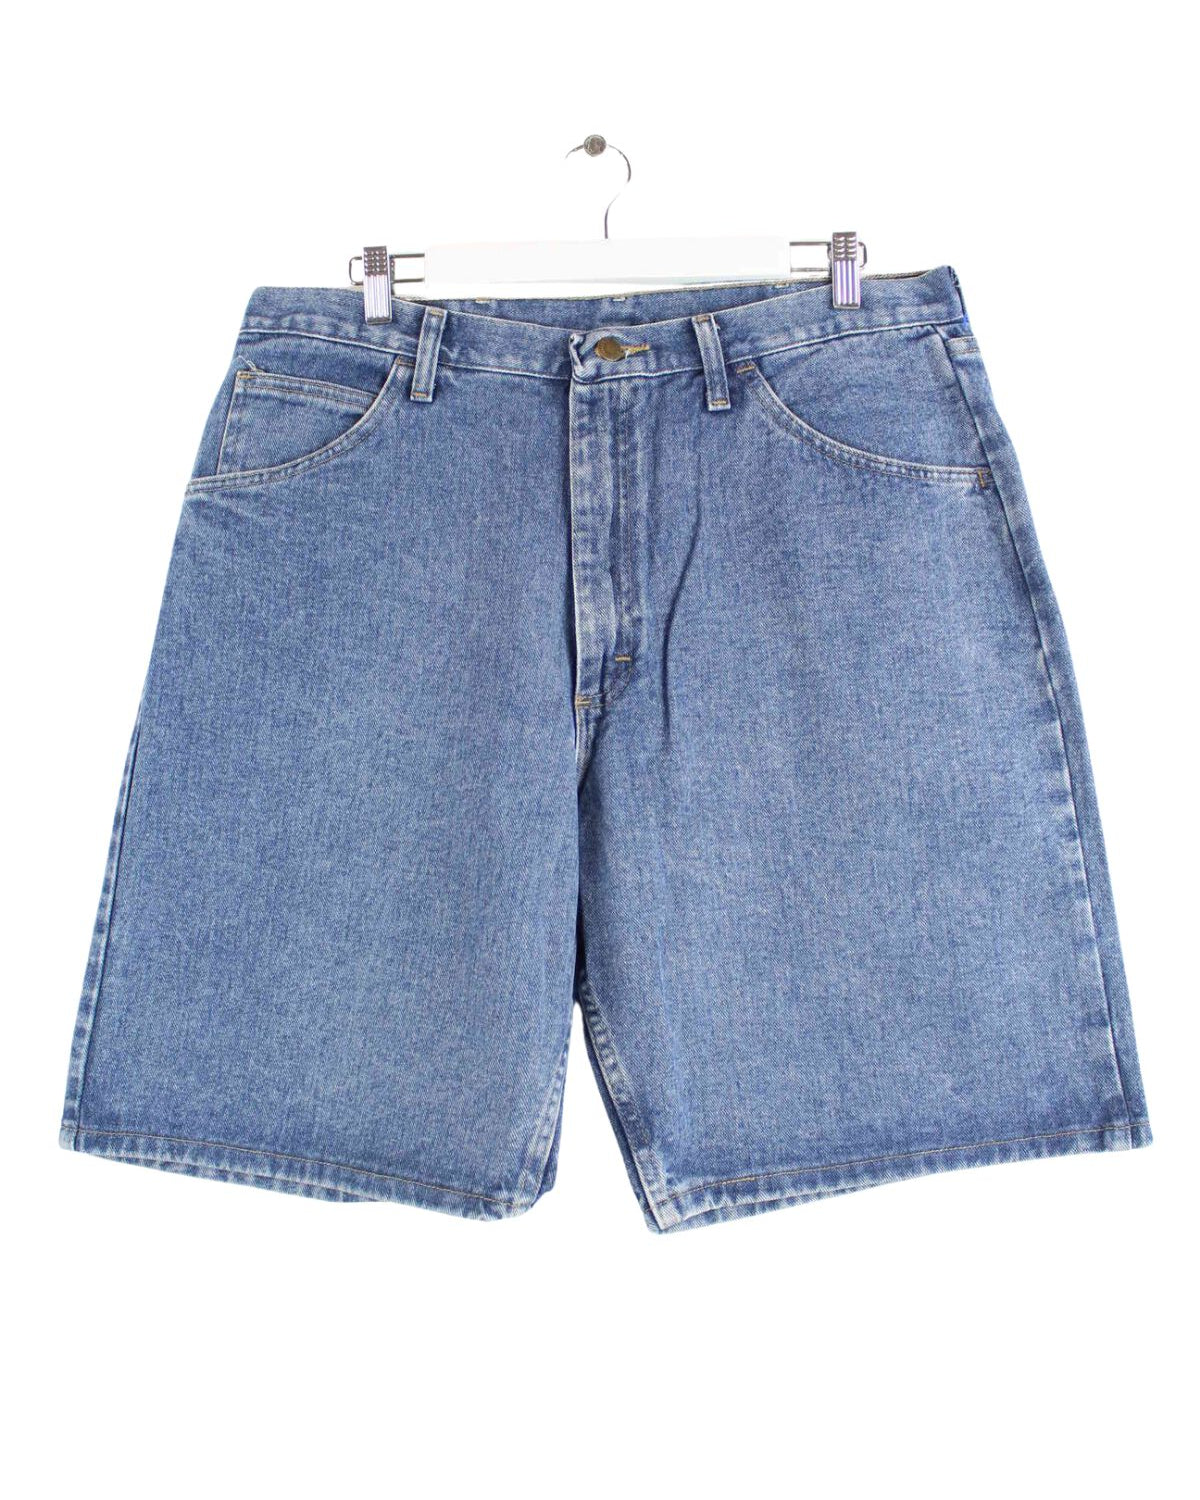 Wrangler Relaxed Fit Jeans Shorts Blau W36 (front image)